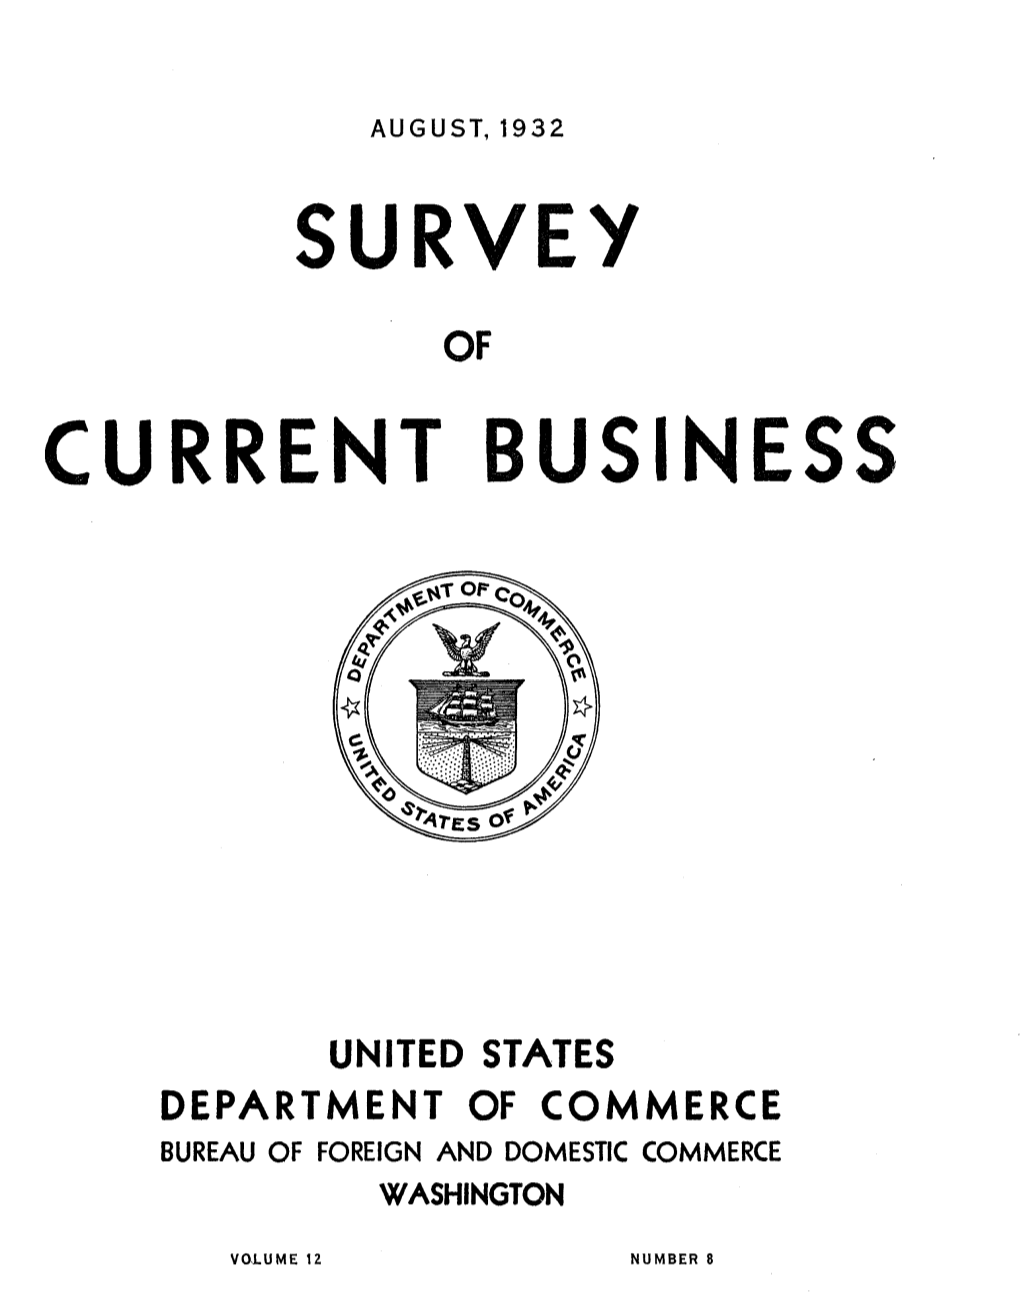 Survey of Current Business August 1932